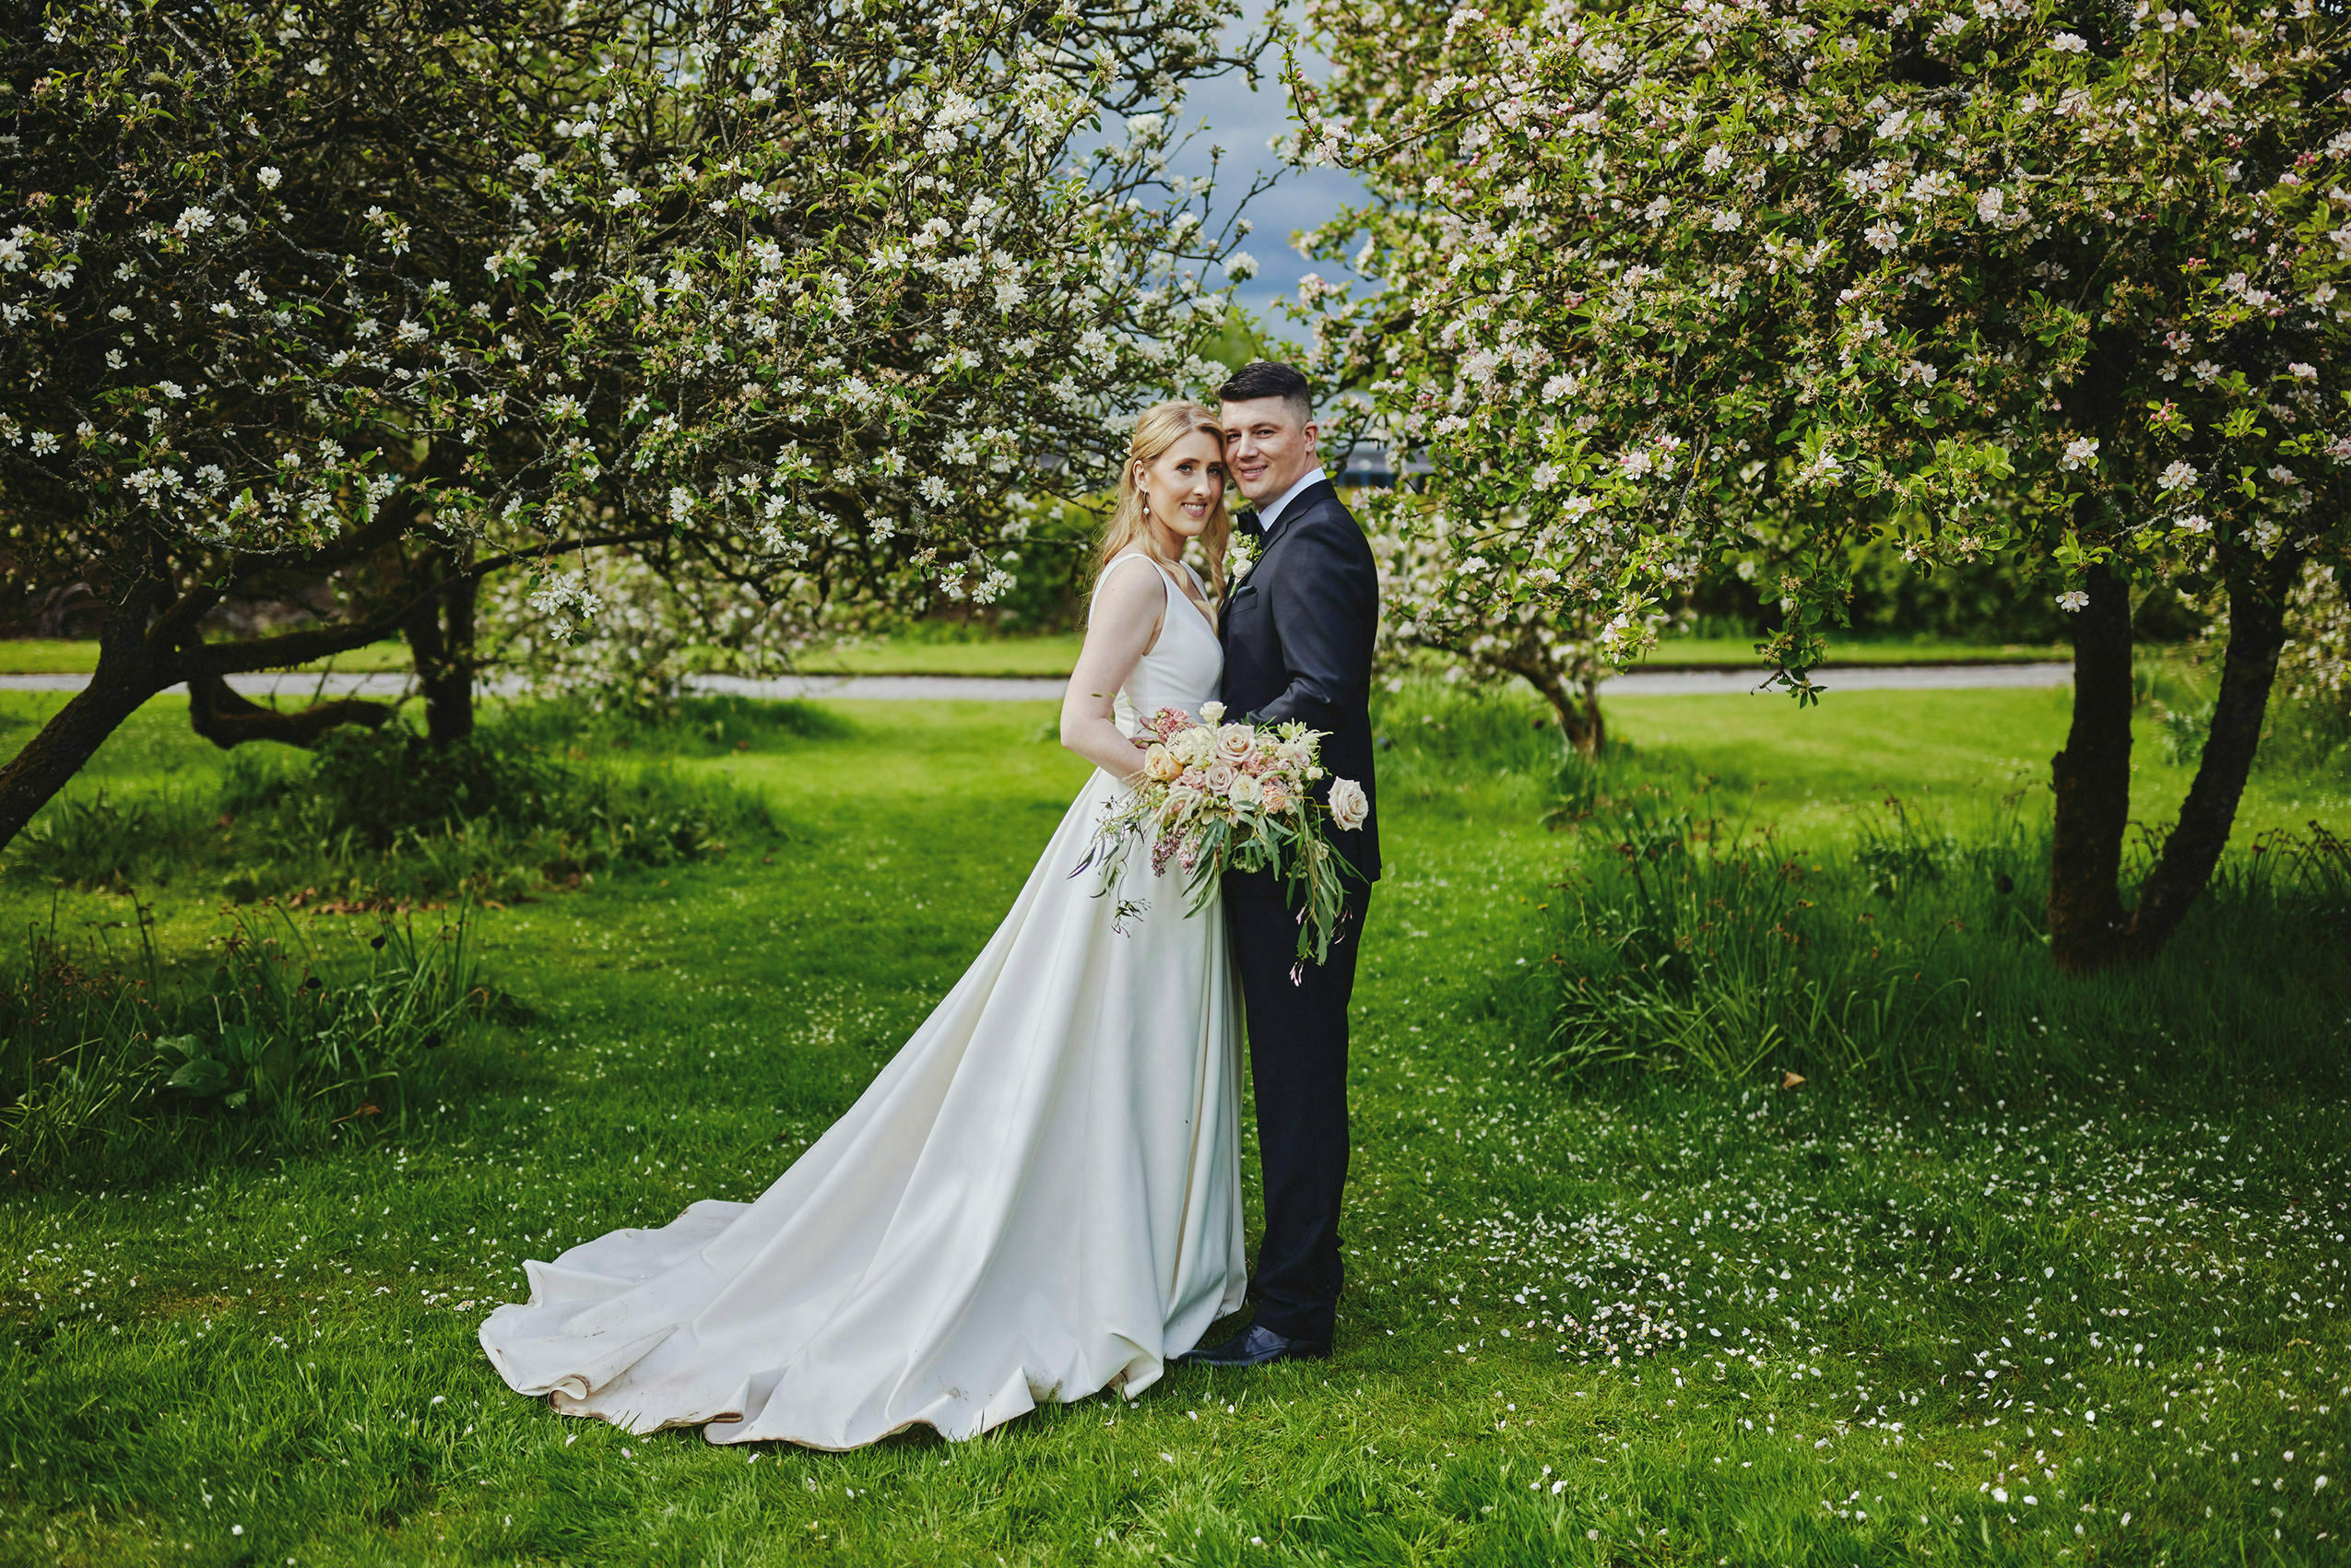 5 Reasons Burtown House Could be the Outdoor Wedding Venue of Your